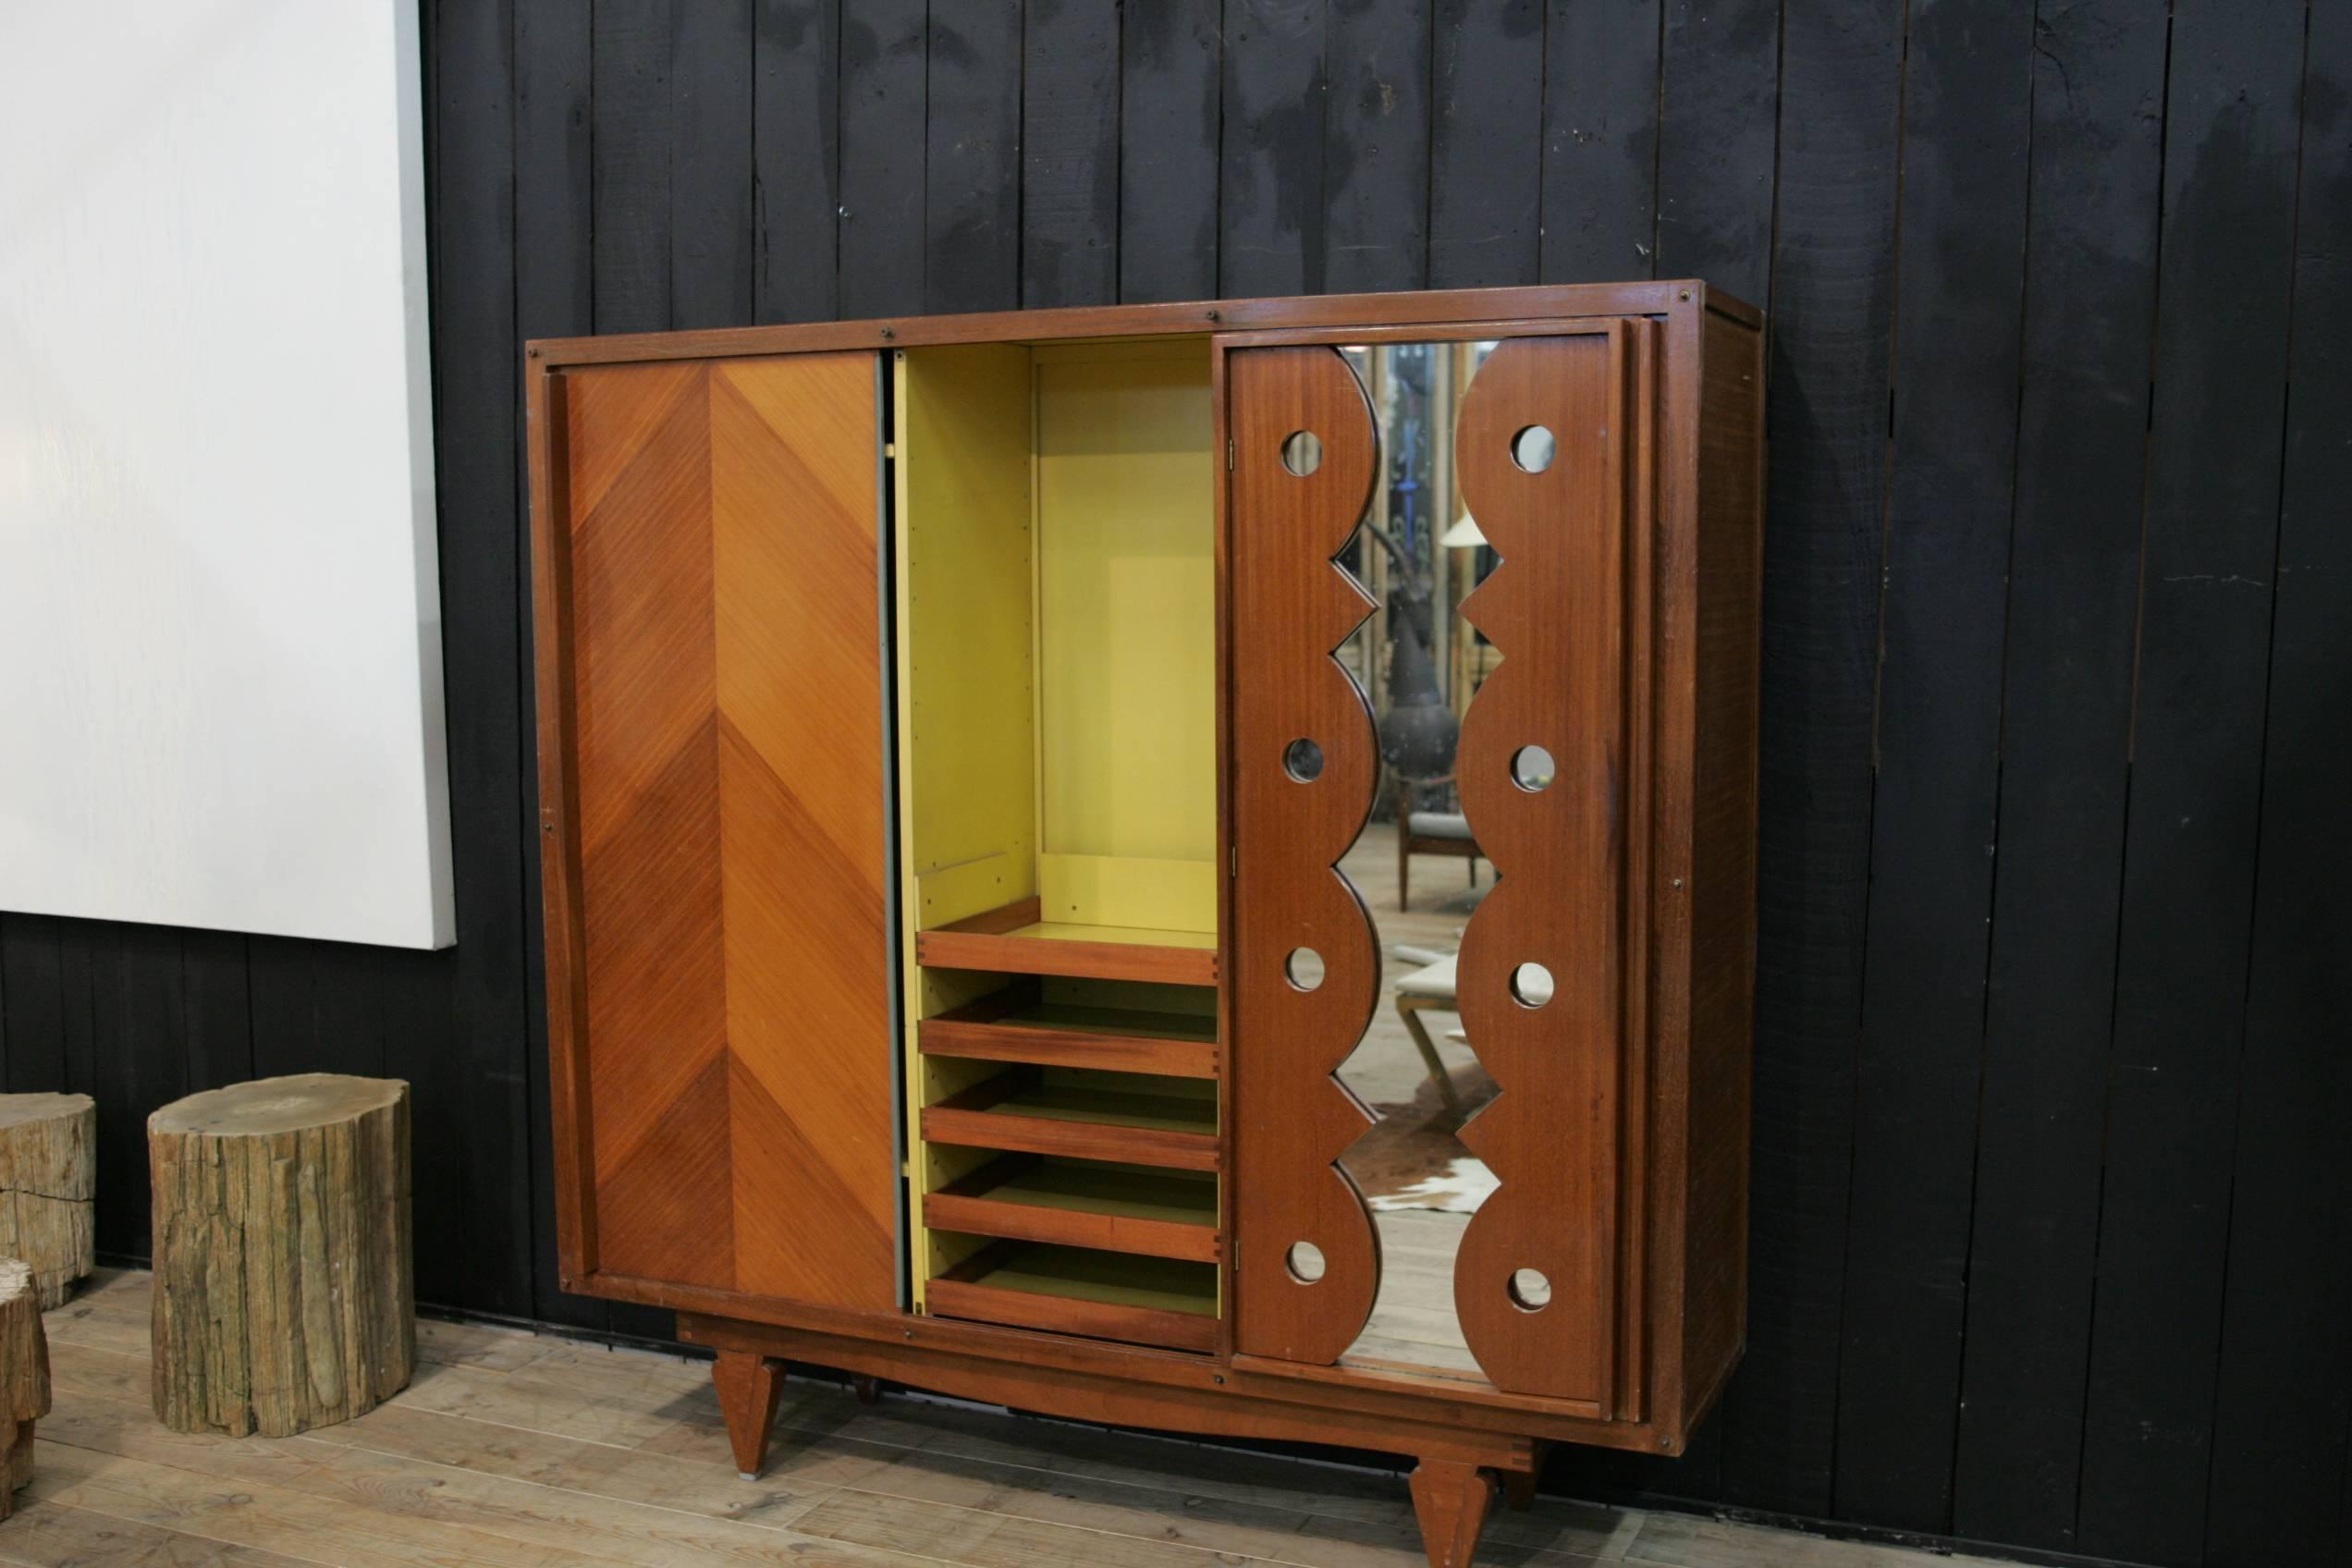 A beautiful wardrobe created by André Sornay lacquered in mustard color from origin.